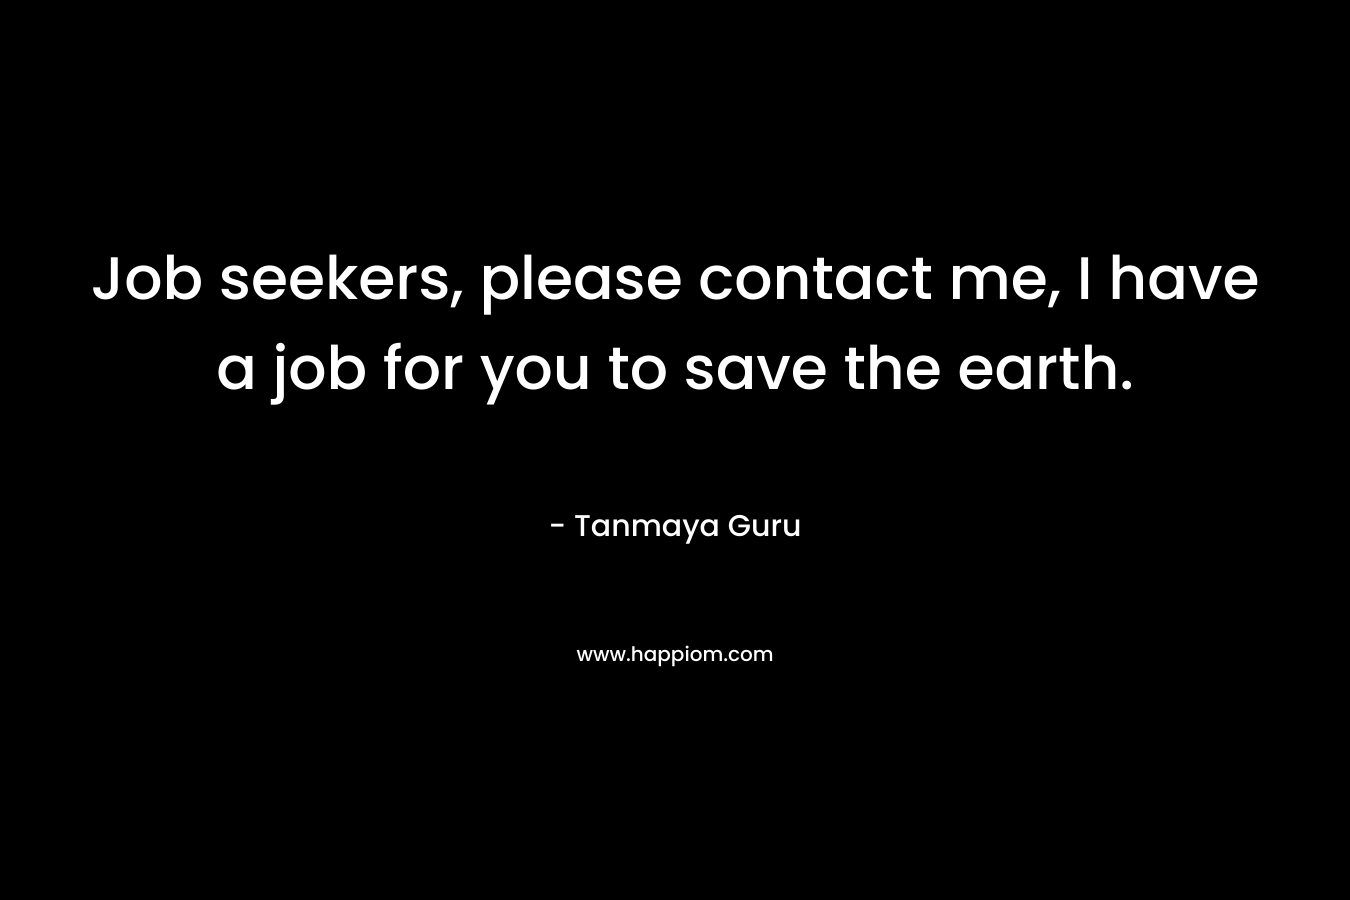 Job seekers, please contact me, I have a job for you to save the earth.